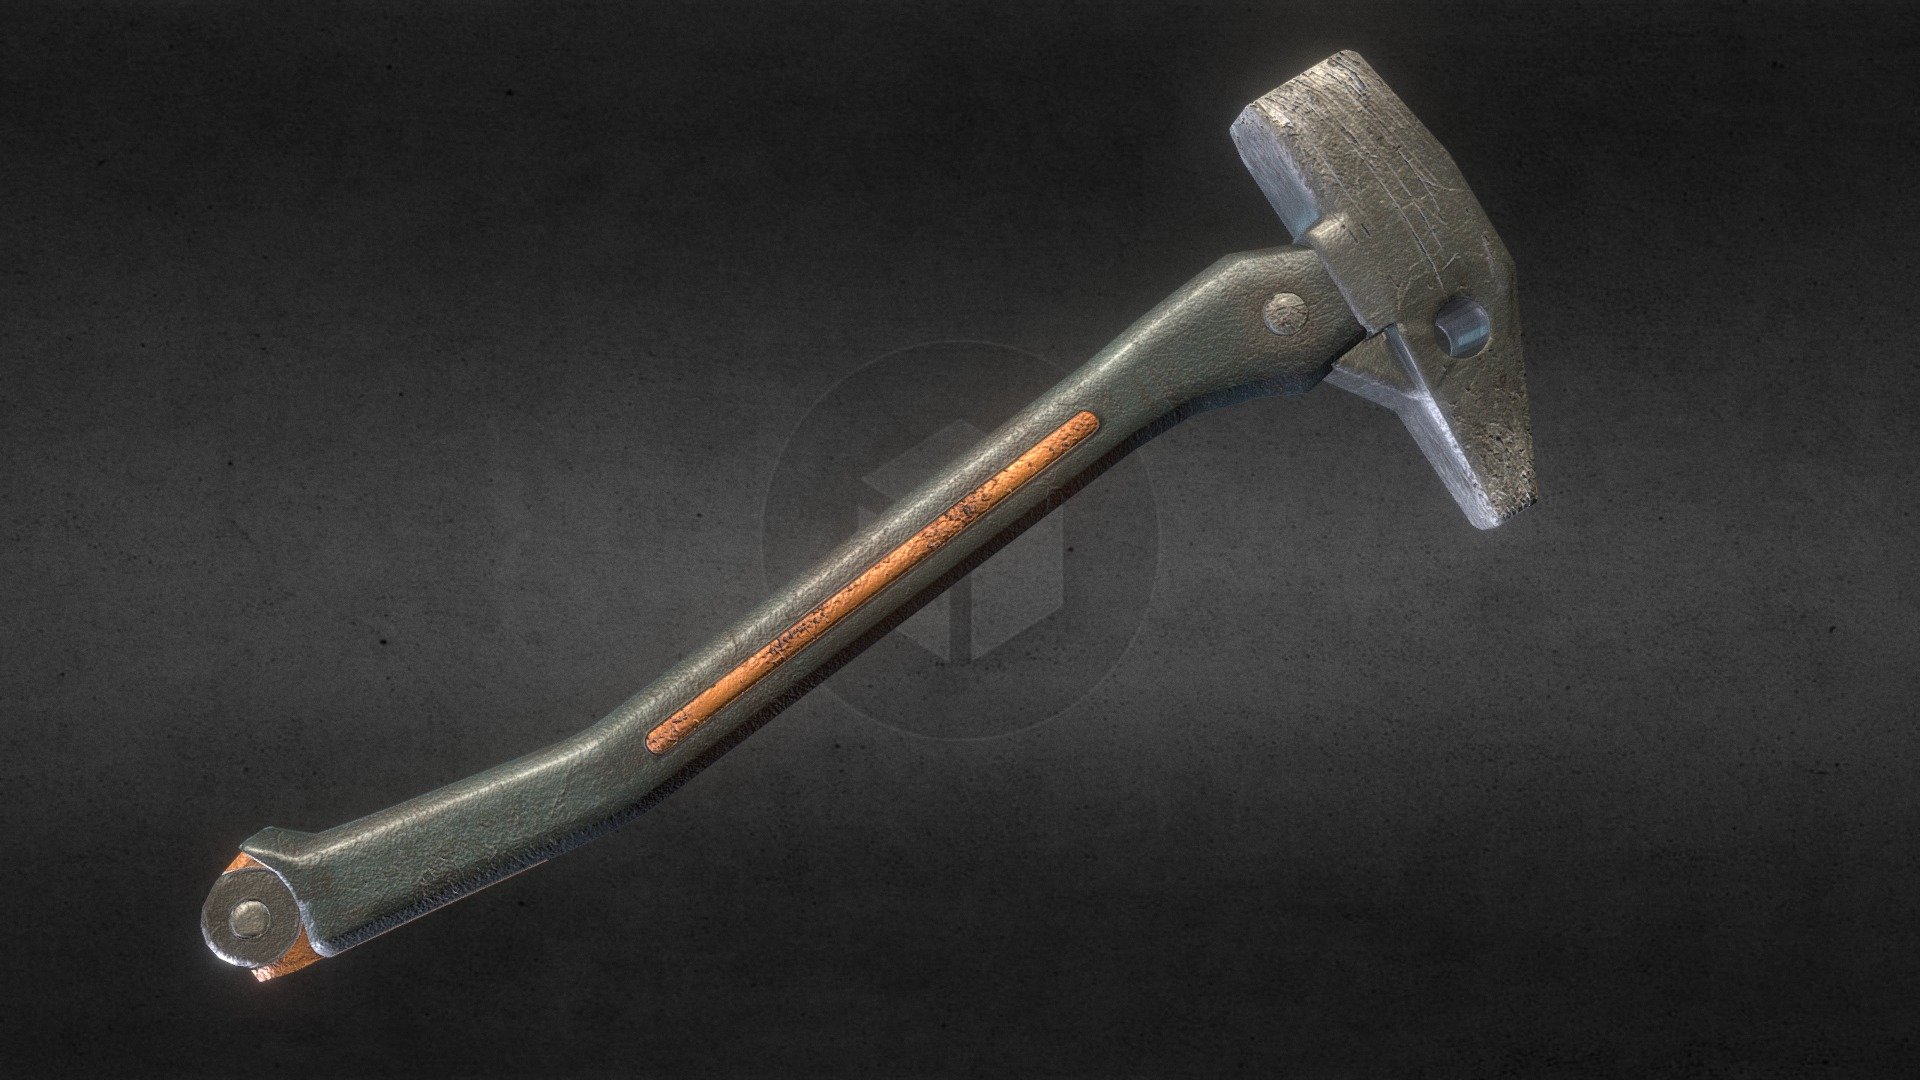 Ladies and Gents it's the iconic sledge of ~ Red Faction Guerrilla

It would be too funny if there were some kinda of mod that yelled Halt Hammer Zeit then eastern european techno club music plays while you smash everything in sight to pieces. :3

It's the actual game model with some HDish features to look more realistic..

Enjoy Skecthfams 3d model